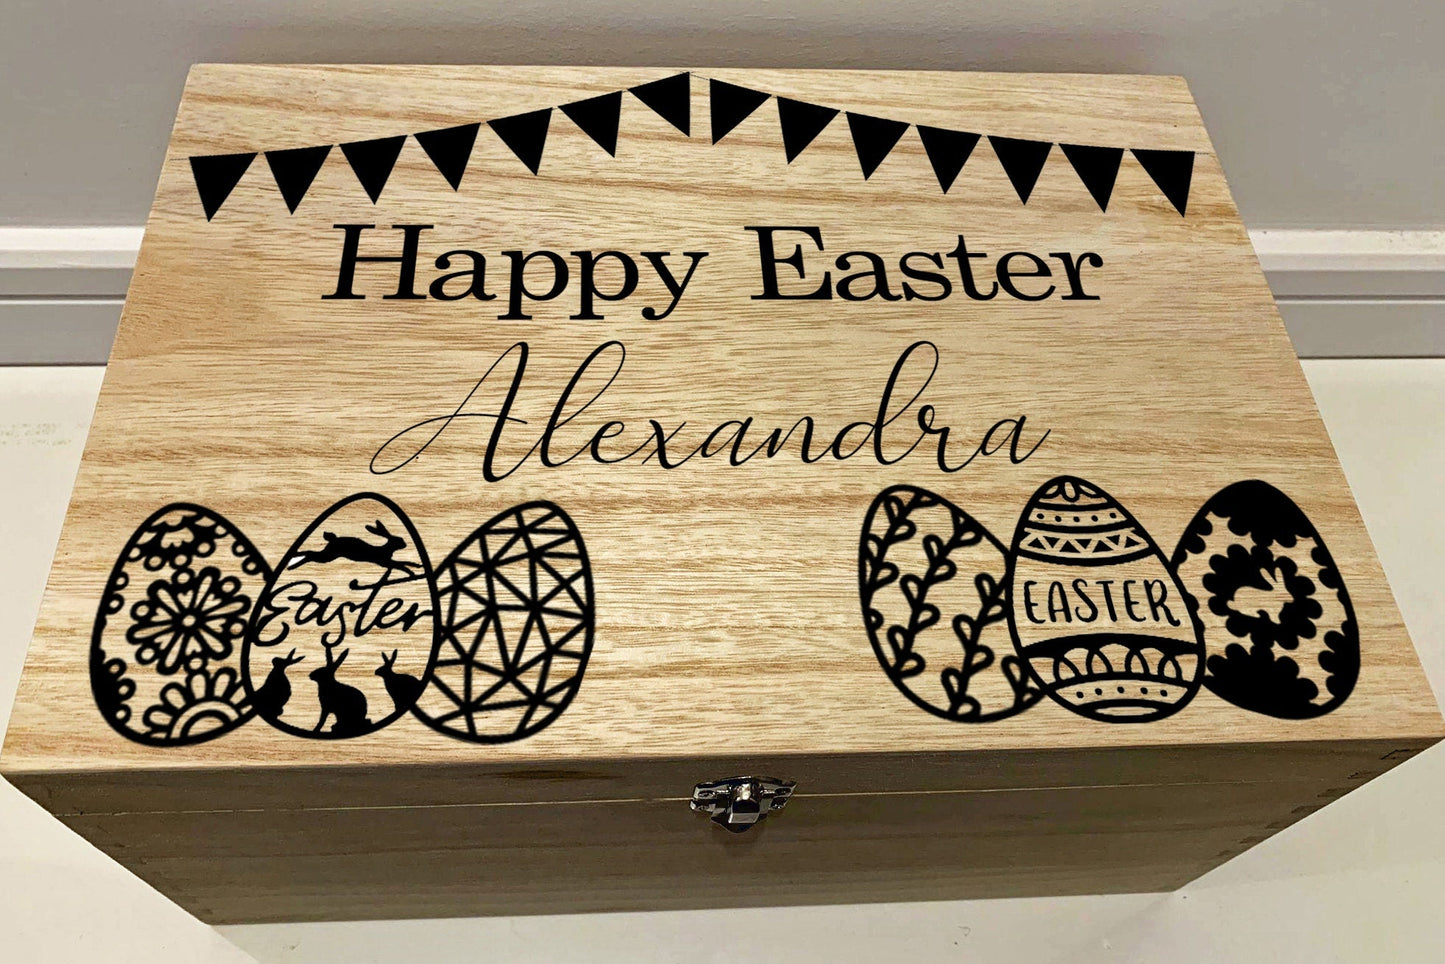 Large Personalised Engraved Happy Easter Wooden Box - Resplendent Aurora